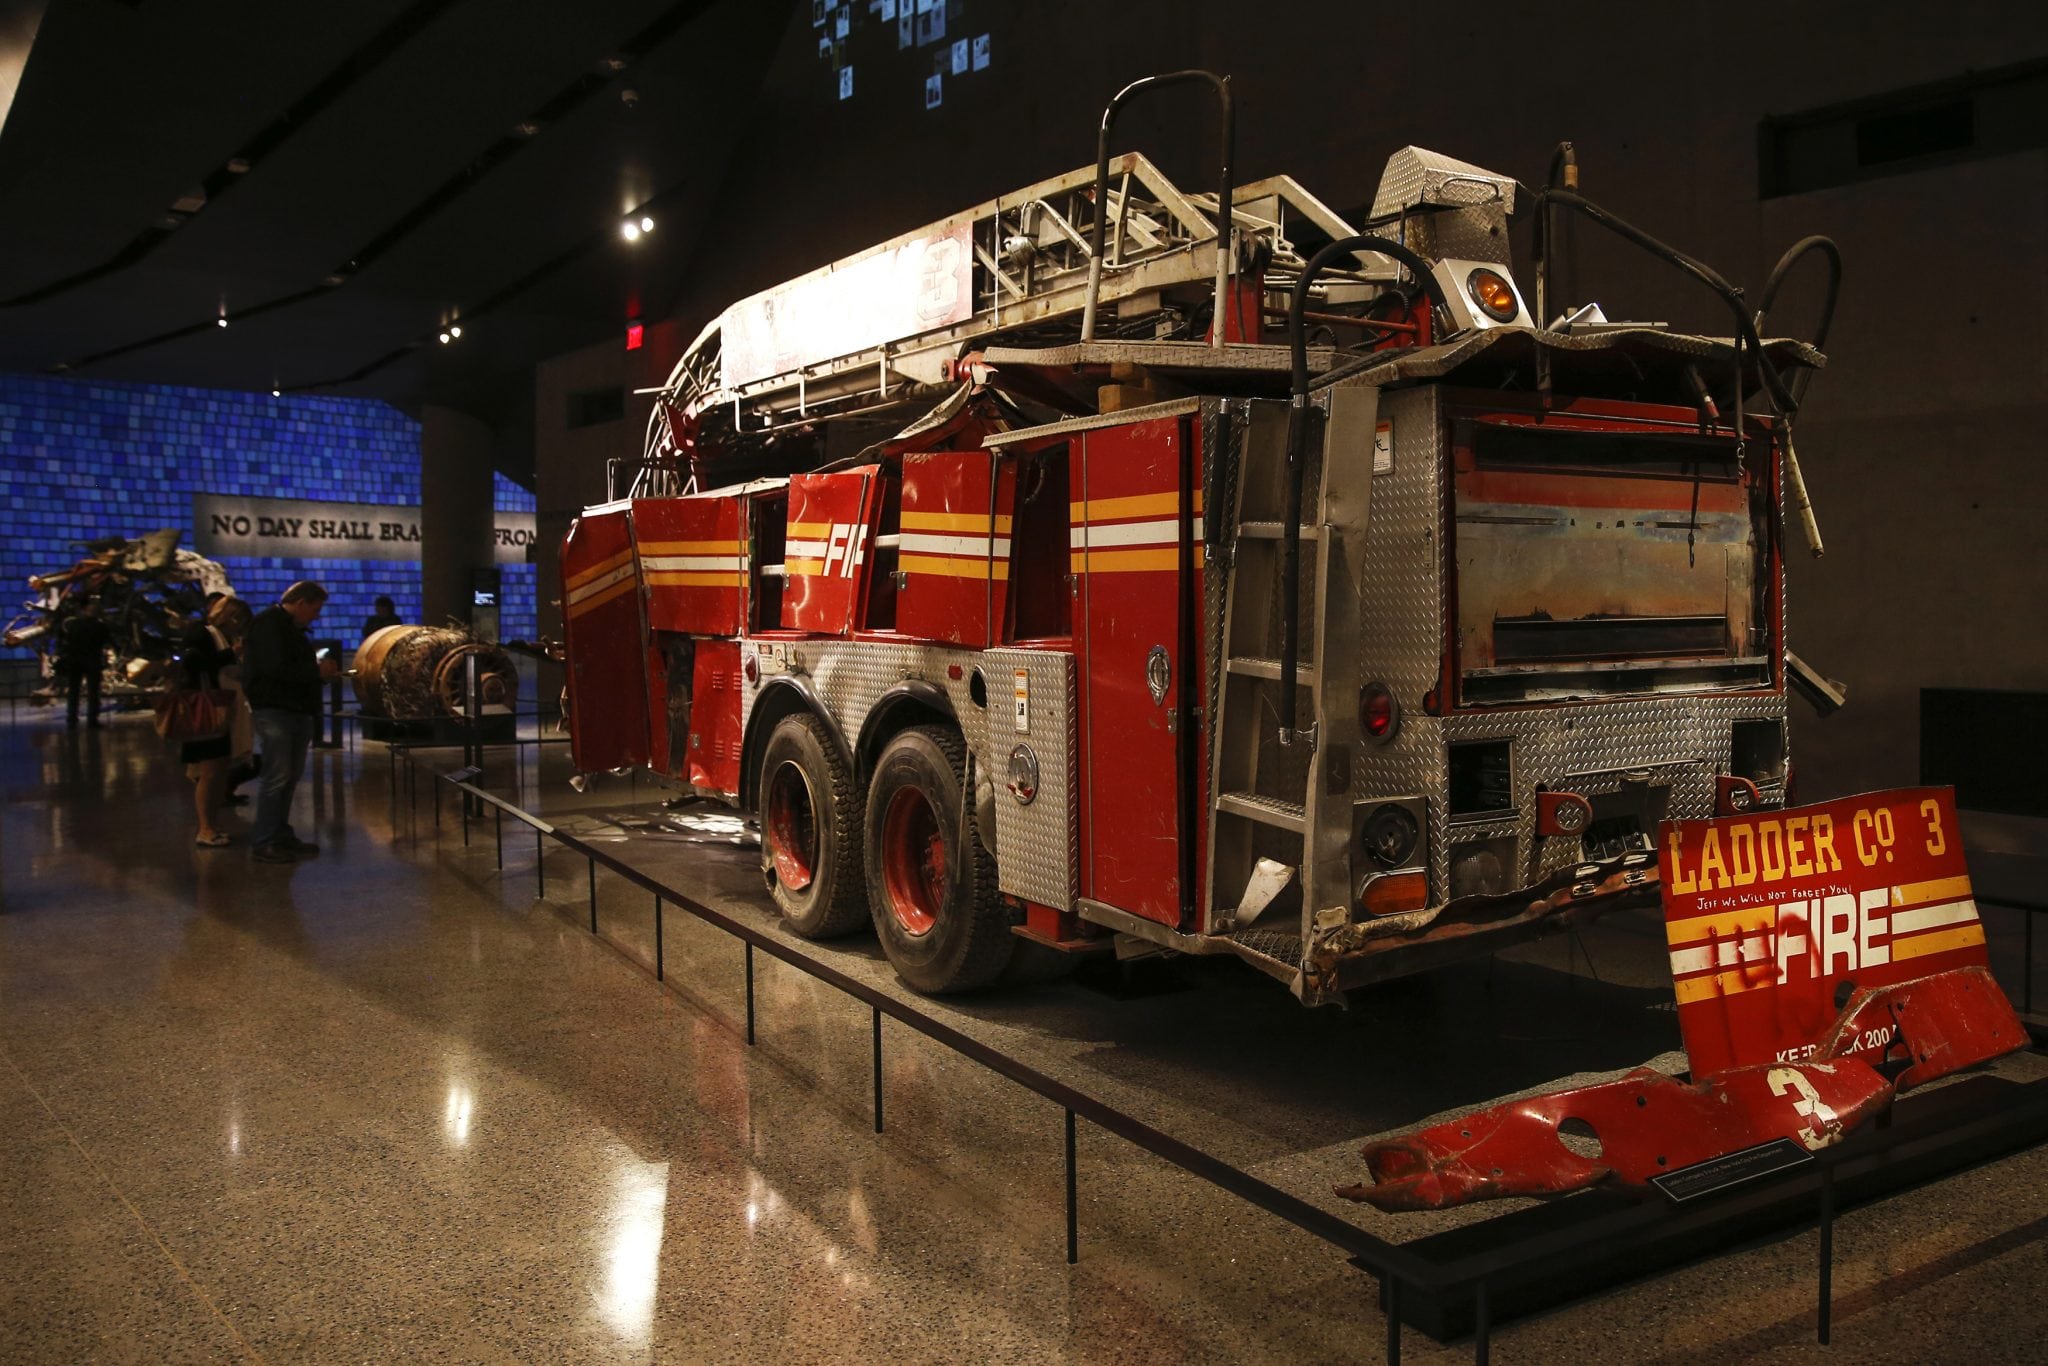 A FDNY fire truck from Ladder Co. 3 is seen inside the National September 11 Memorial & Museum during a press preview in New York May 14, 2014.